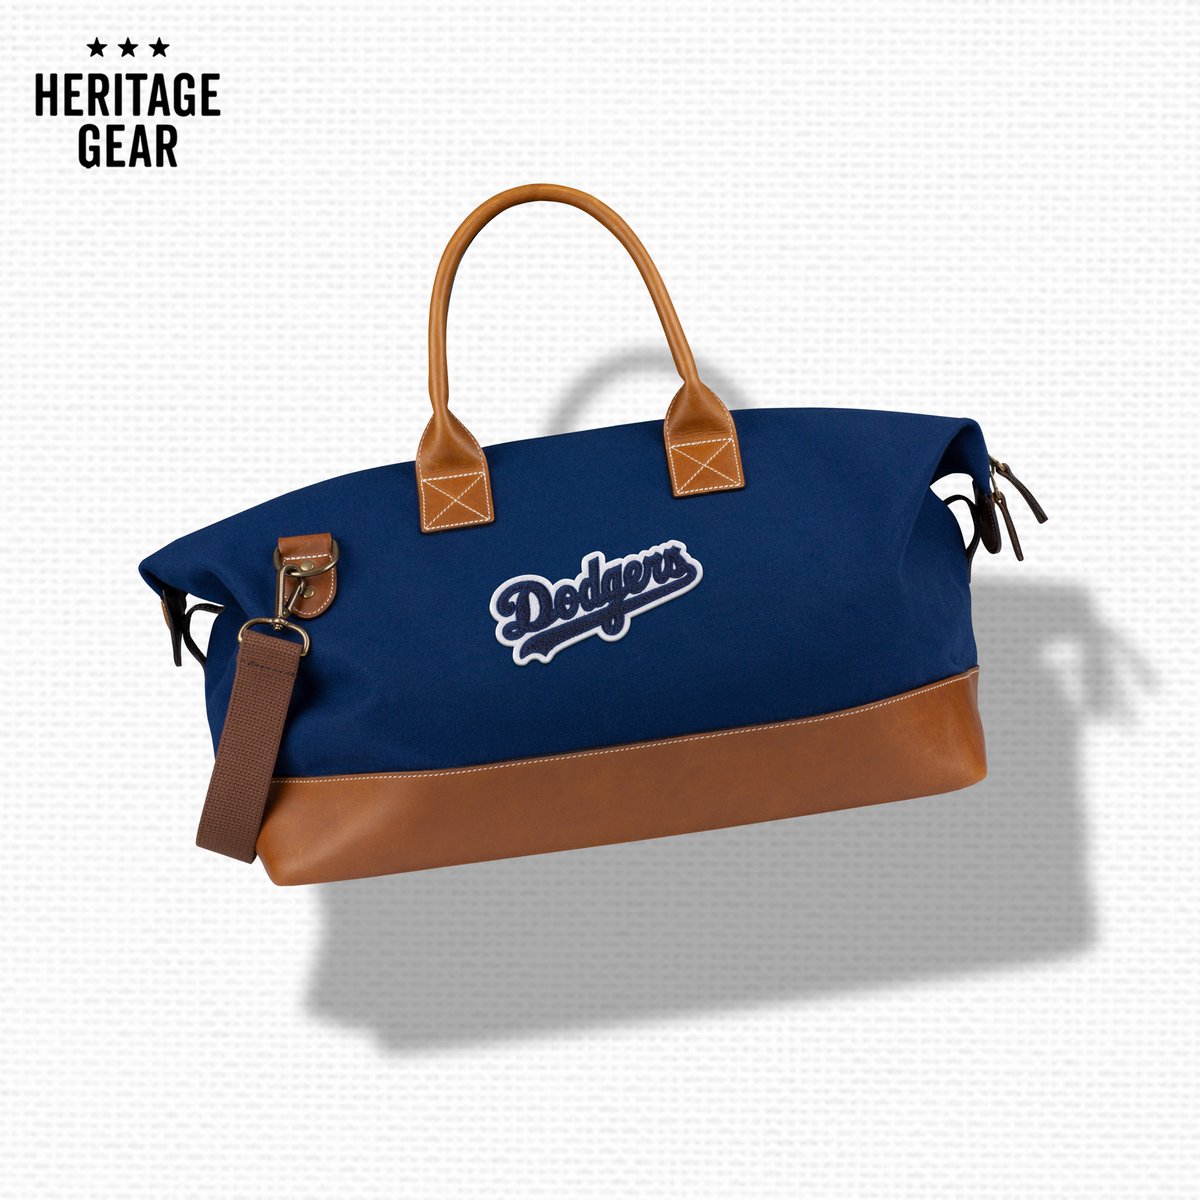 Fast starts call for great bags.
Get your @Dodgers Weekender here: heritagegear.com/collections/lo…